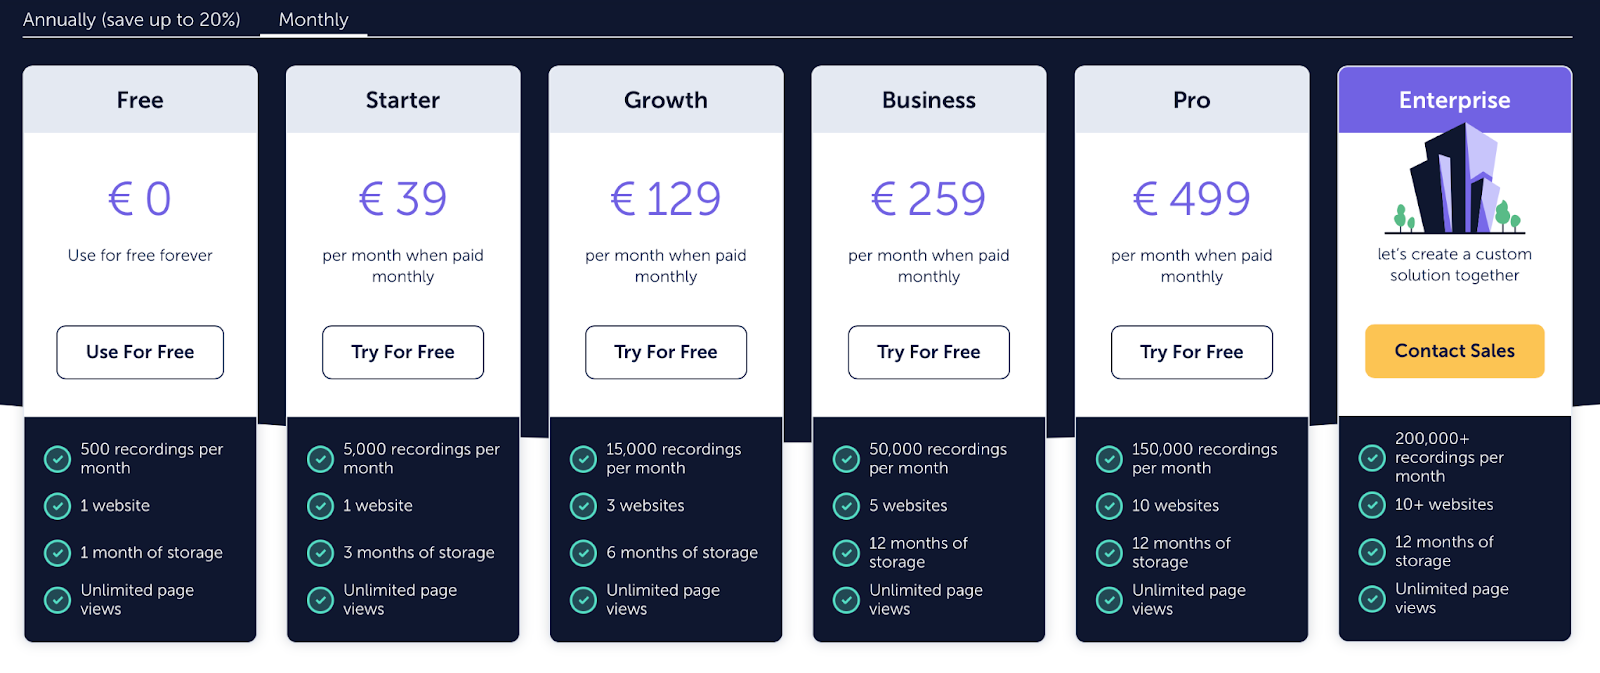 Mouseflow pricing